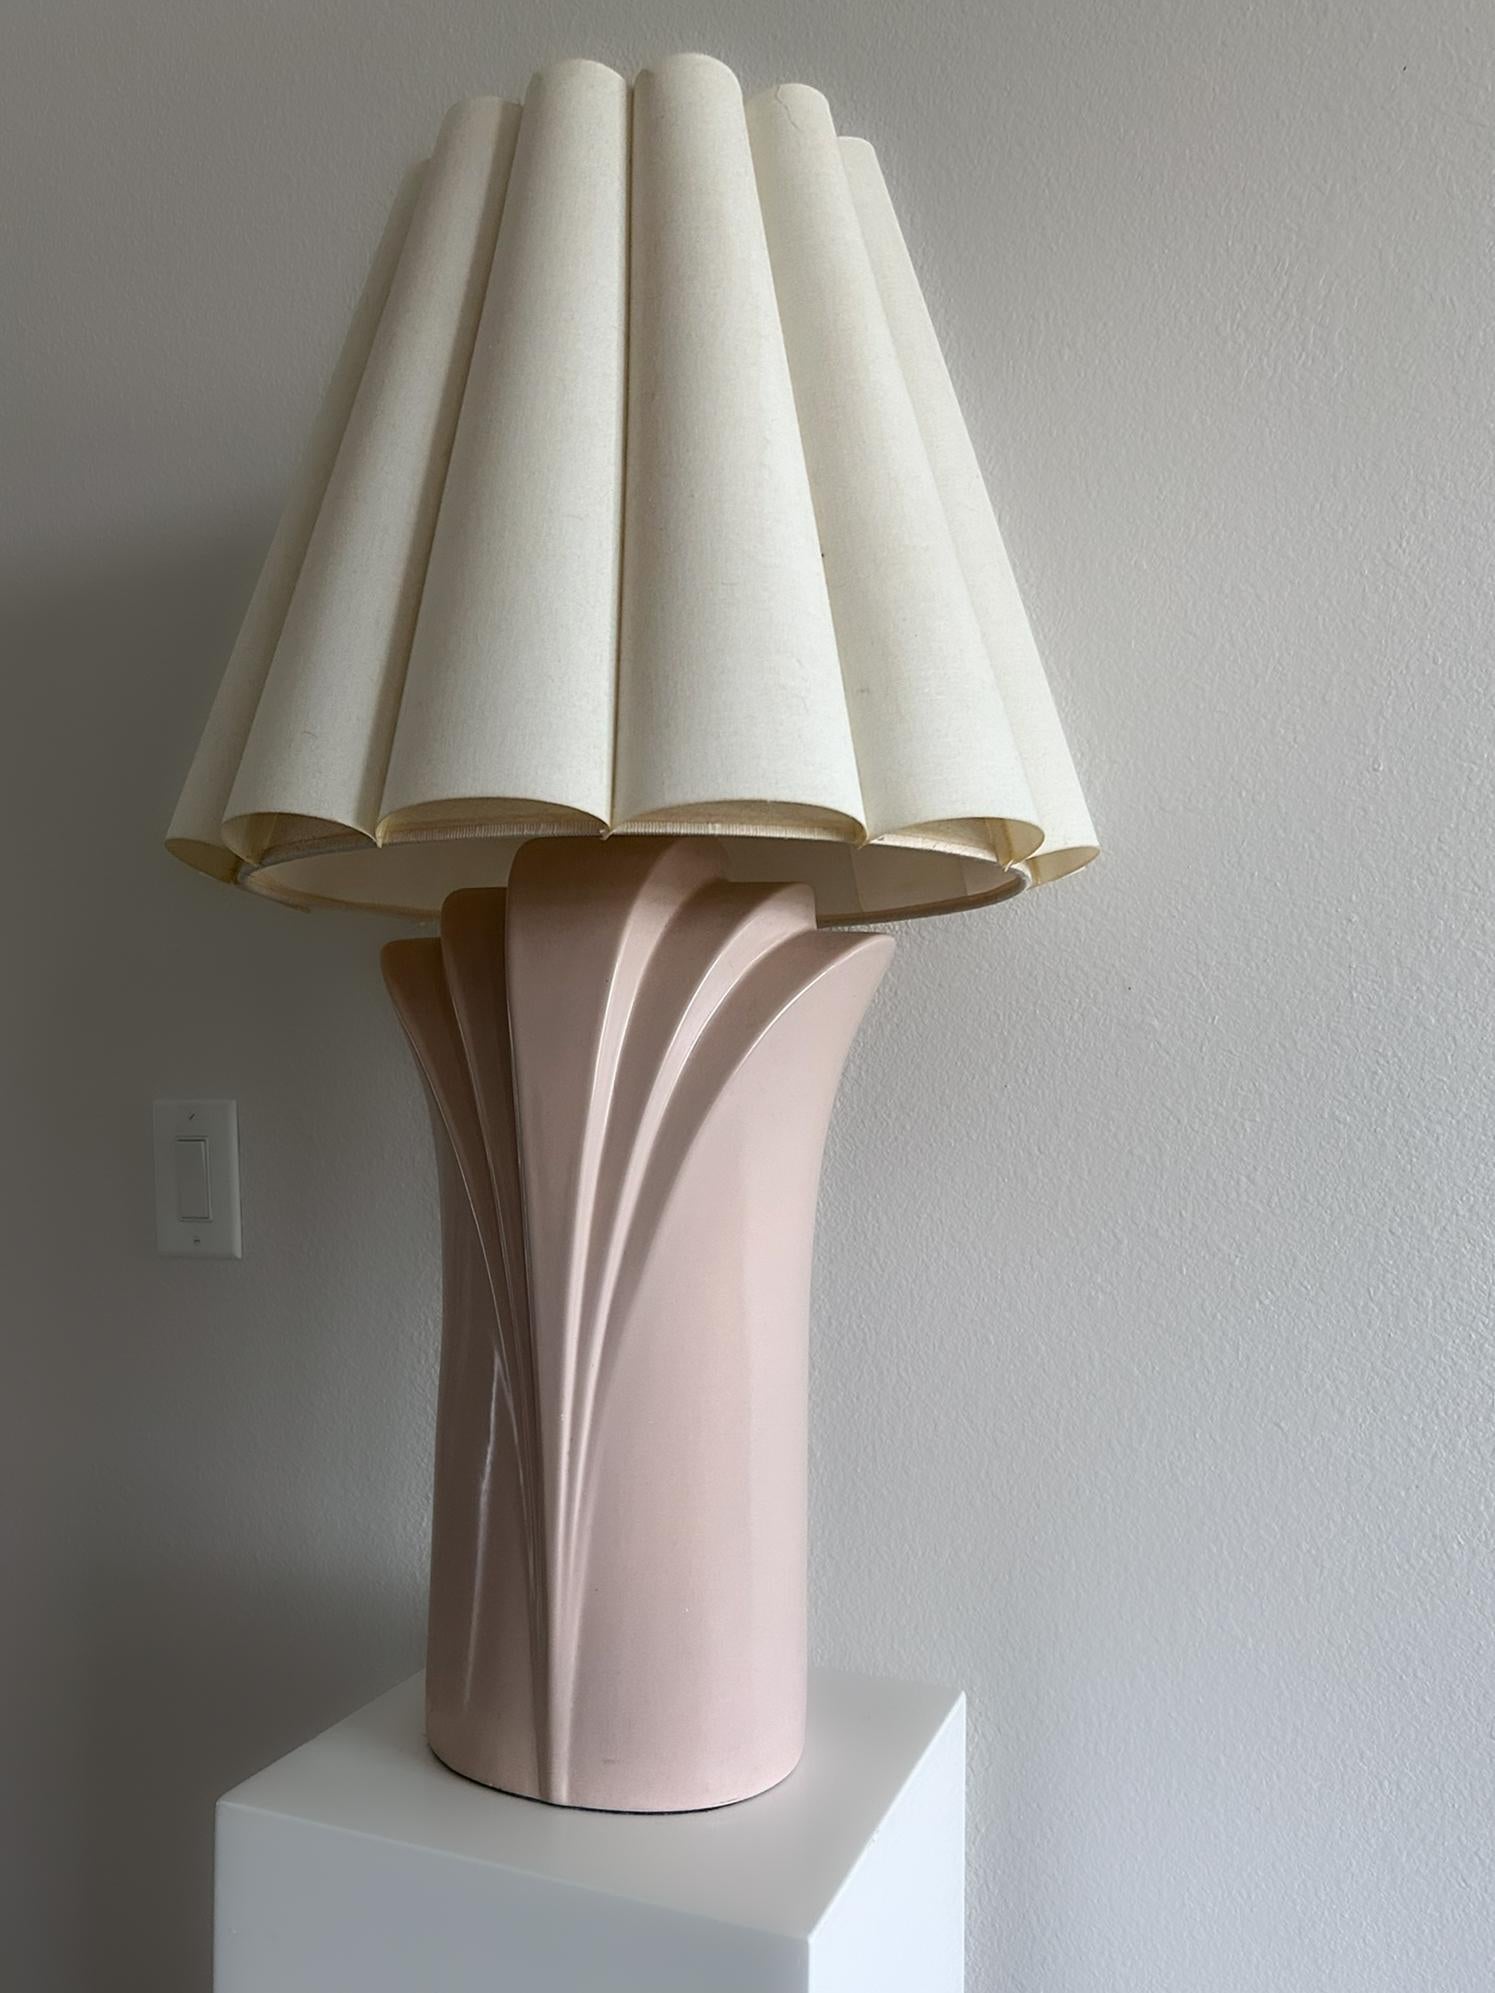 A vintage pastel colored table lamp.